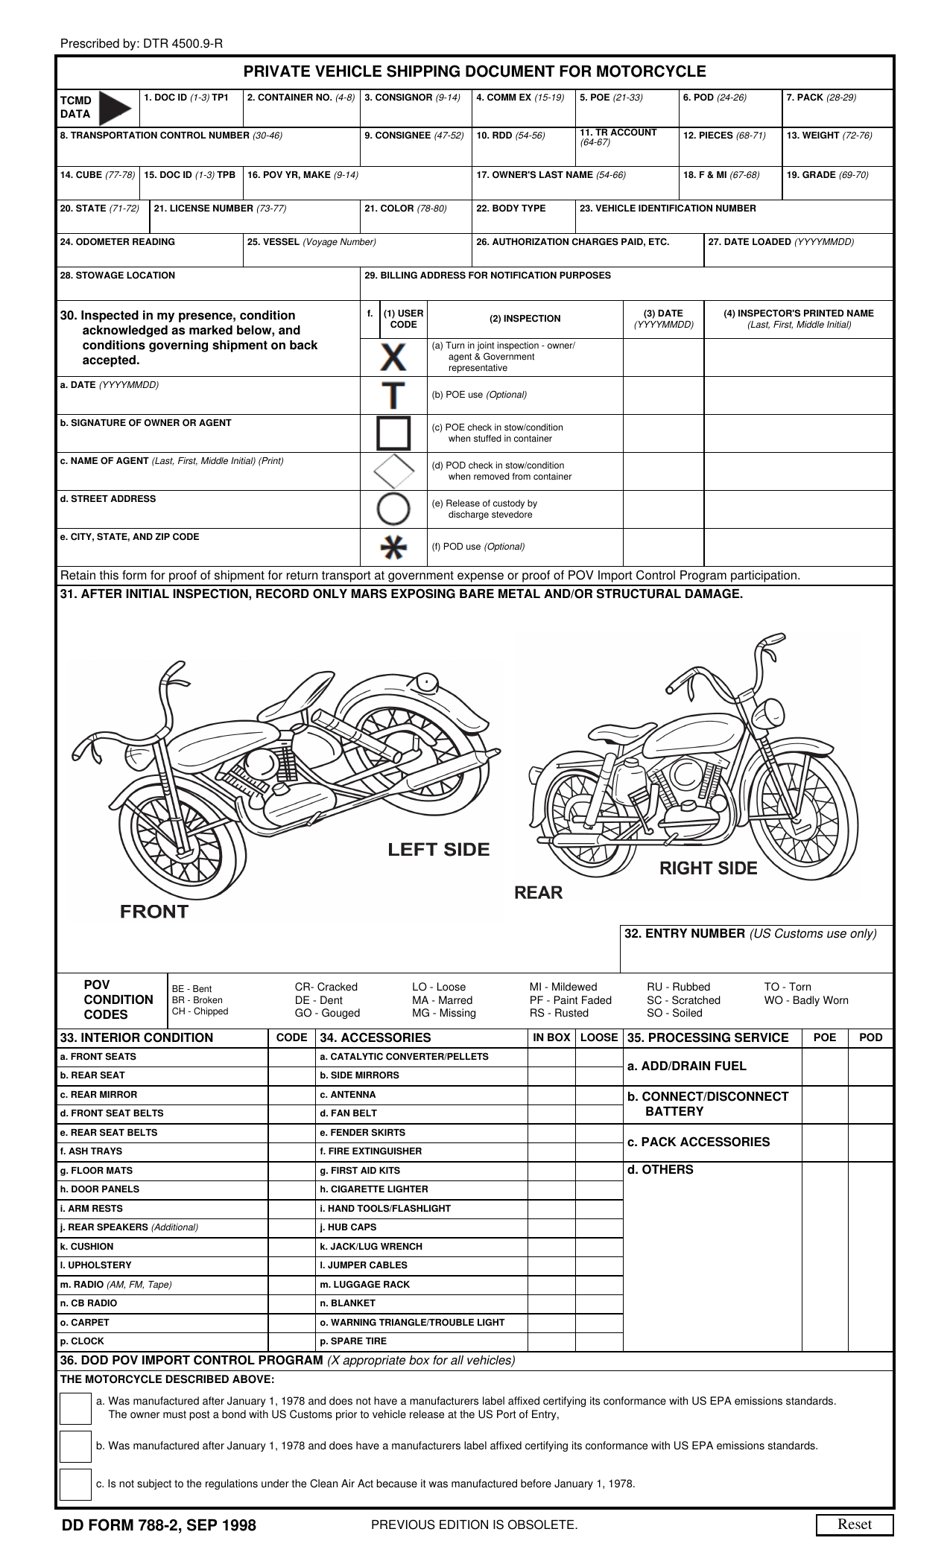 DD Form 788-2 Private Vehicle Shipping Document for Motorcycle, Page 1